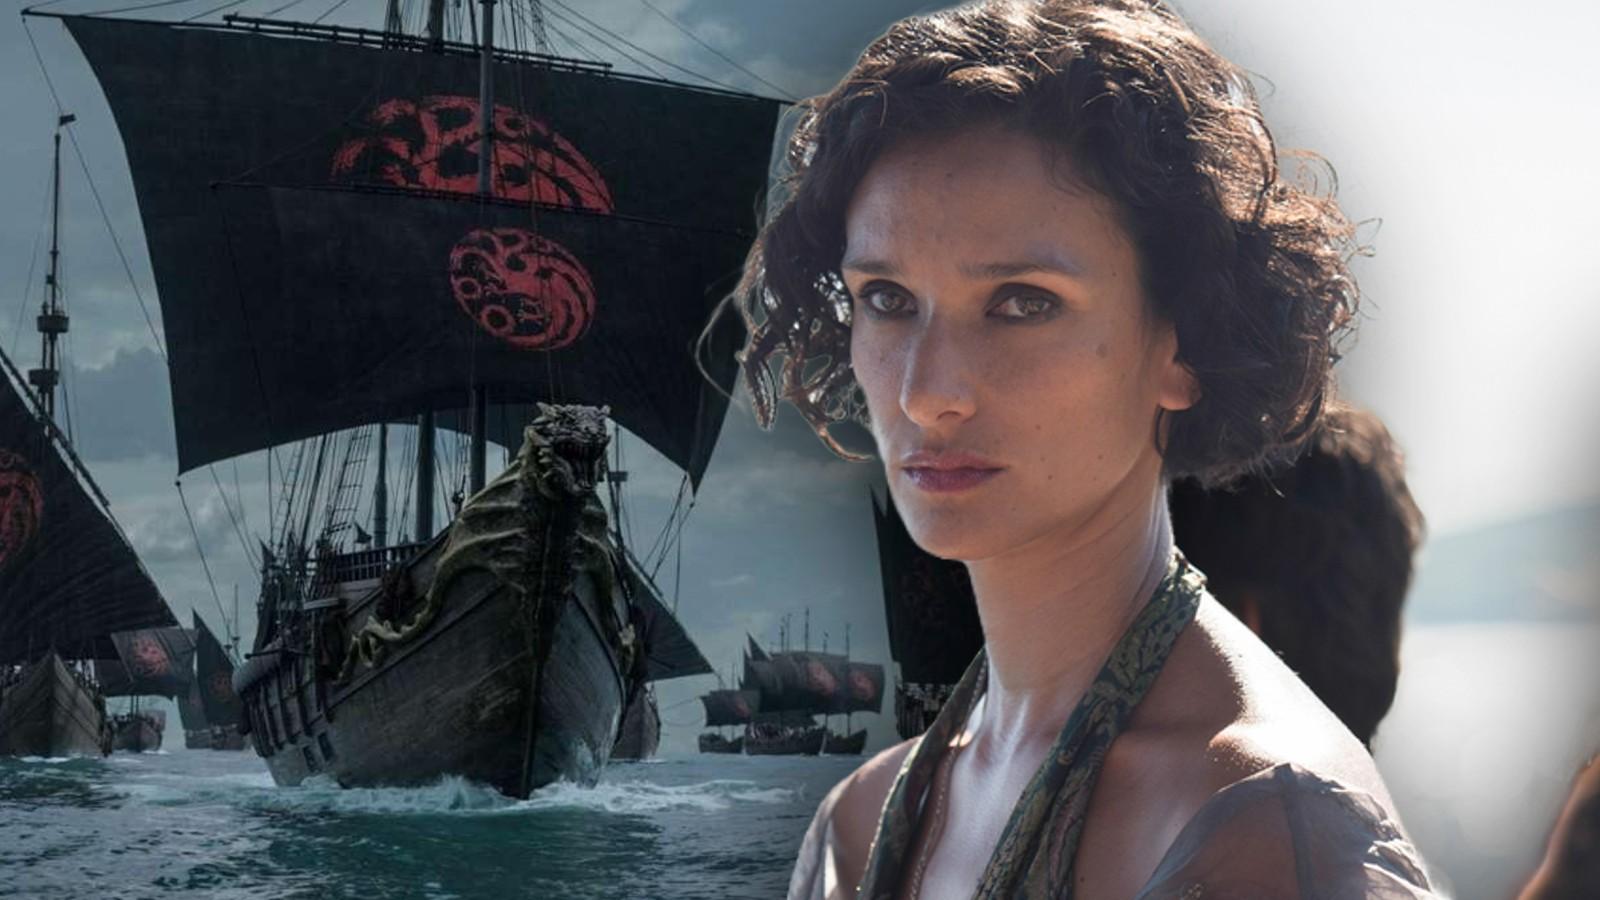 Ship from Game of Thrones and Ellaria Sand